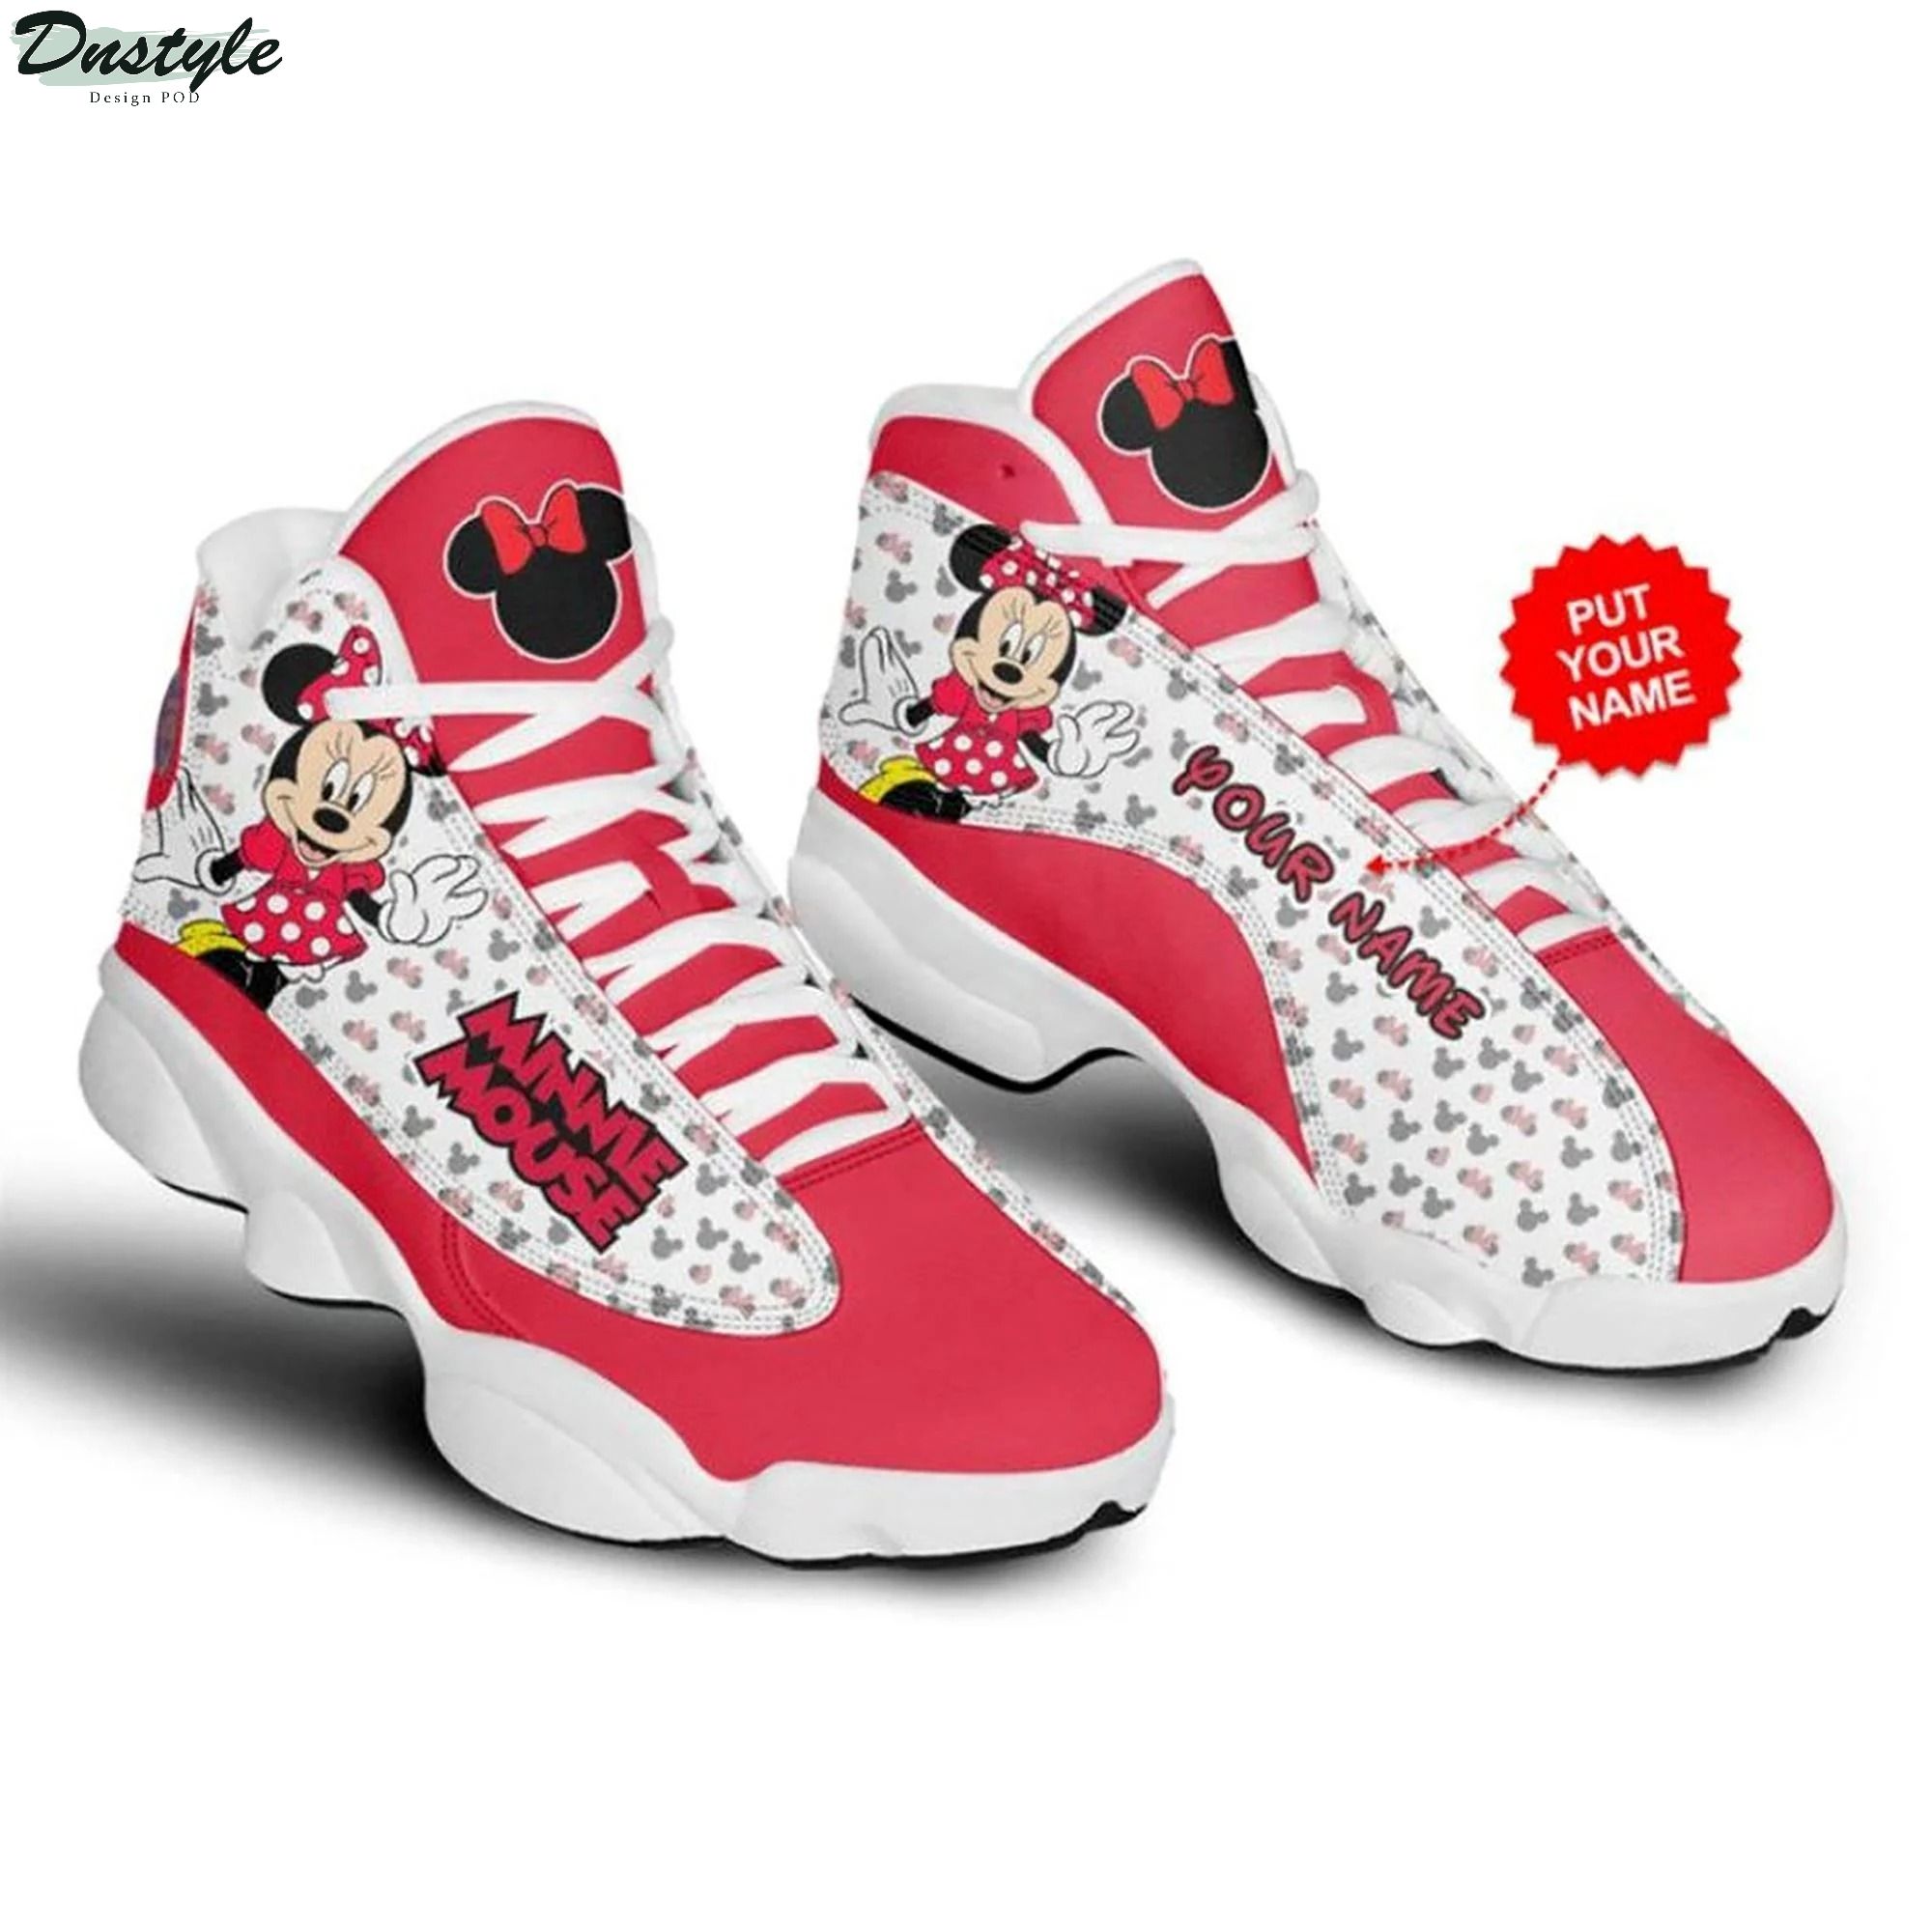 Personalized Minnie Mouse Air Jordan 13 Sneaker Shoes